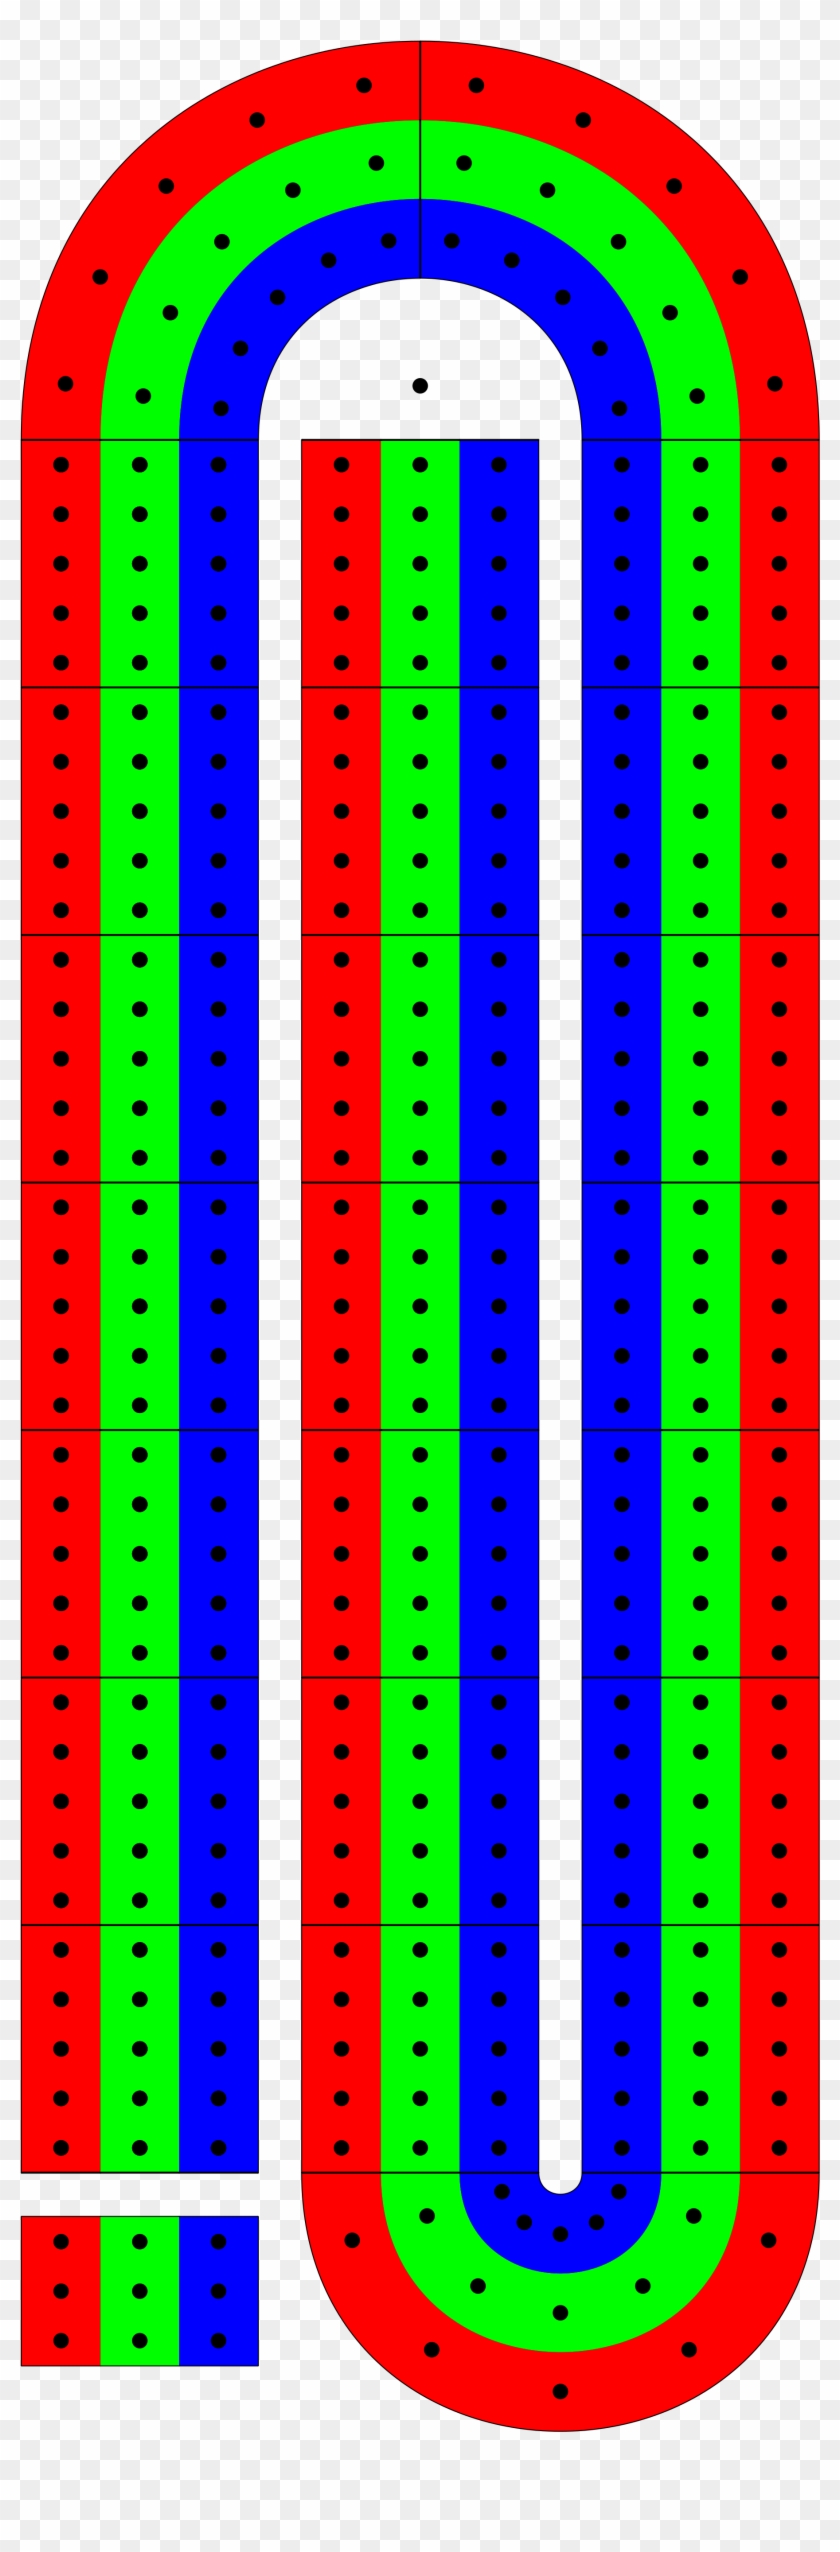 File Cribbage Board Svg Wikimedia Commons - Cribbage Board To Print #1411611